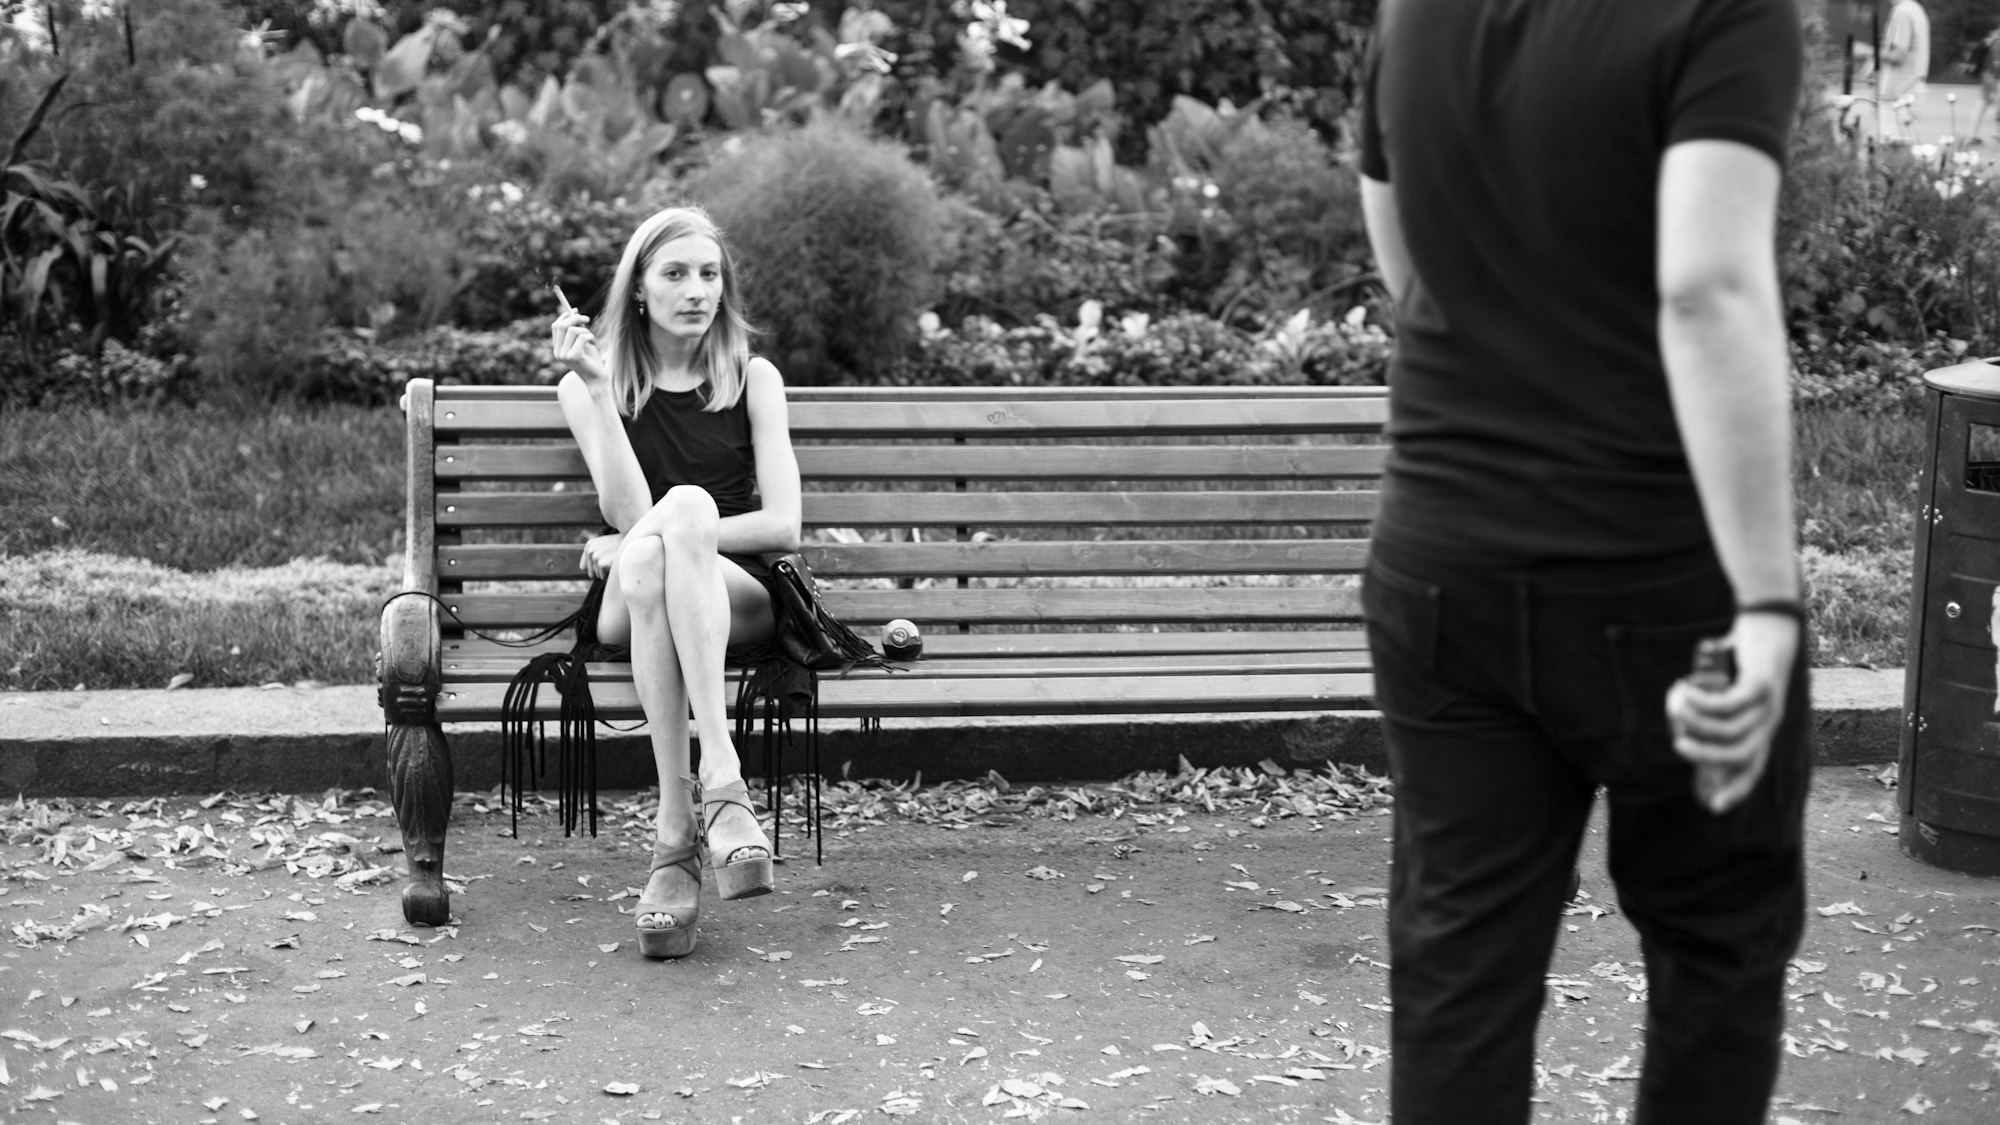 A chic cool woman in an LBD sitting on a bench in a park, smoking.